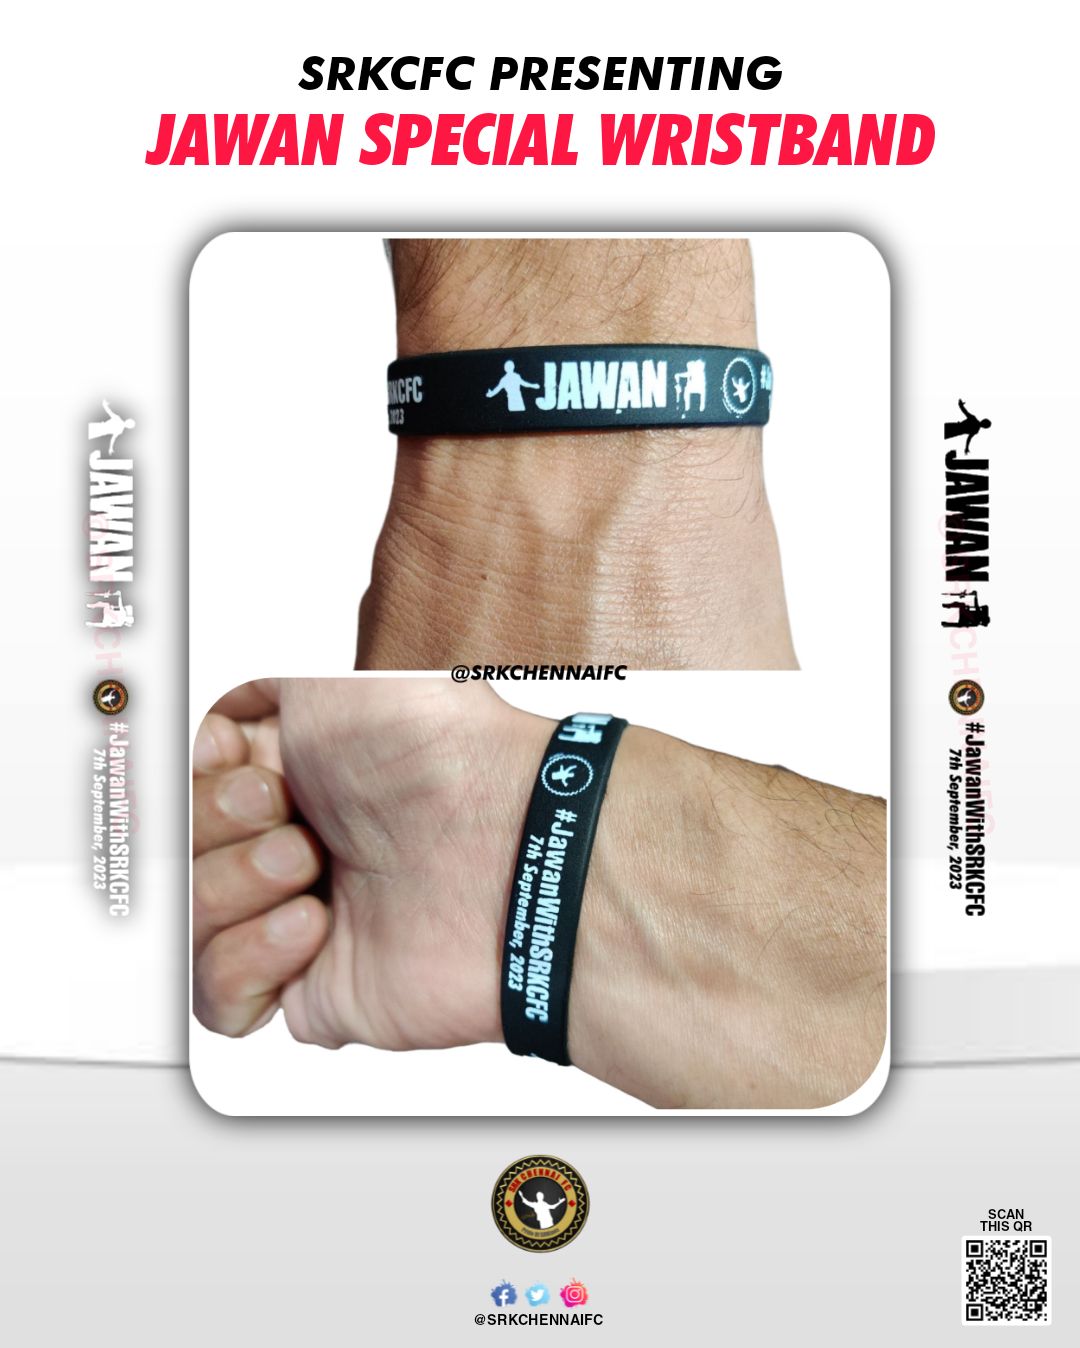 ♡♔SRKCFC♔♡™ on X: Here is our #Jawan special wristband to